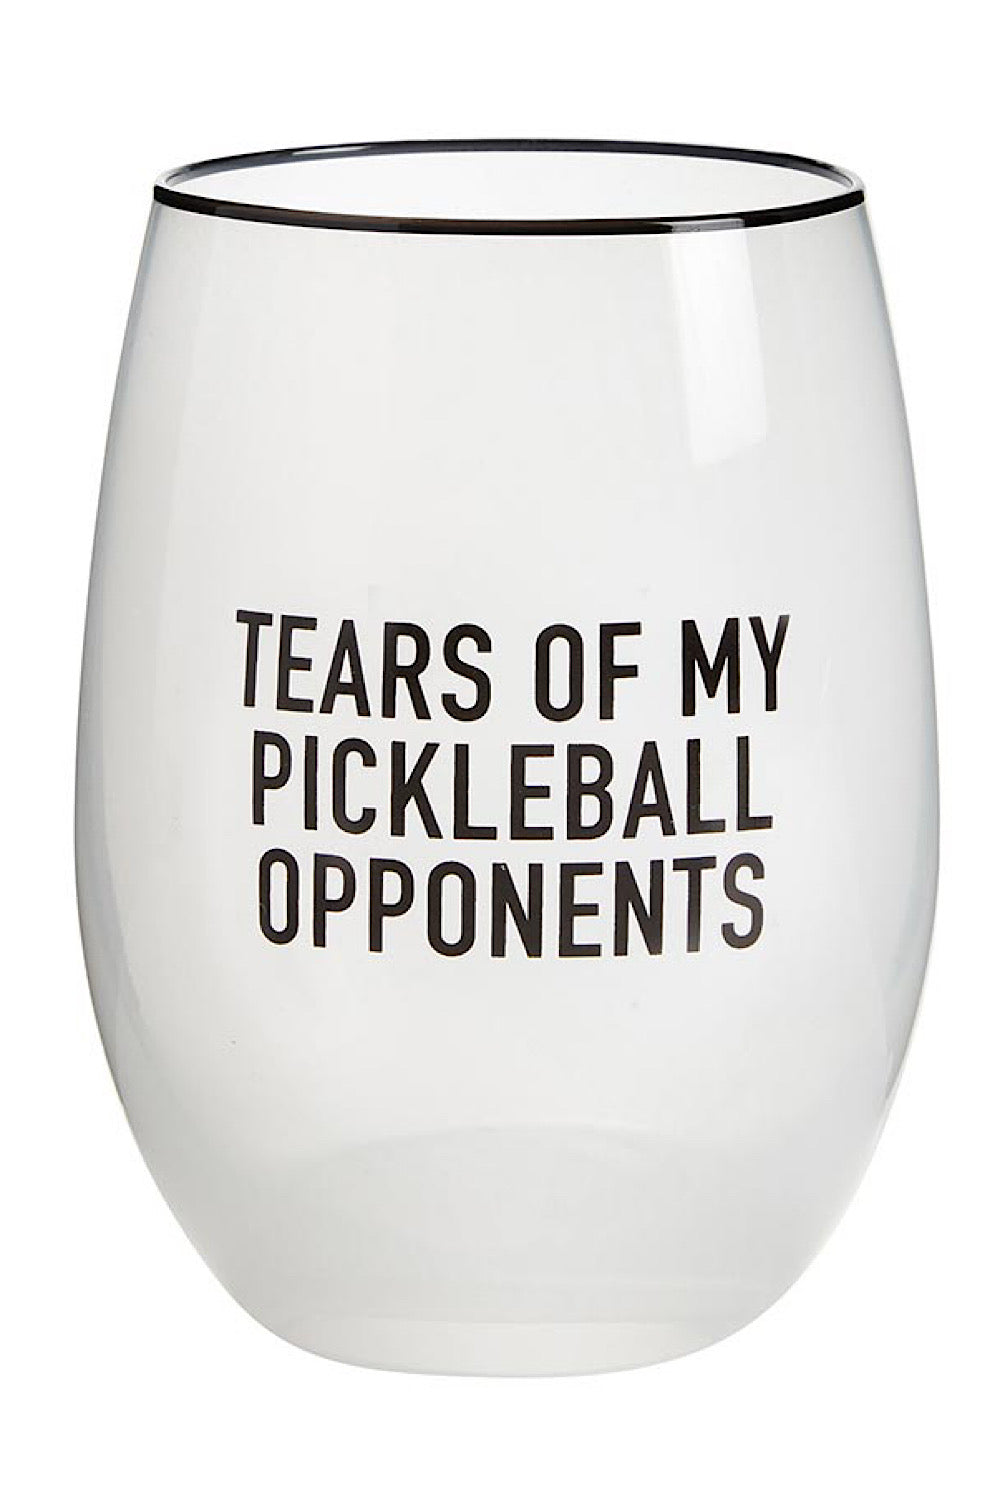 TEARS OF MY PICKLEBALL OPPONENTS WINE GLASS